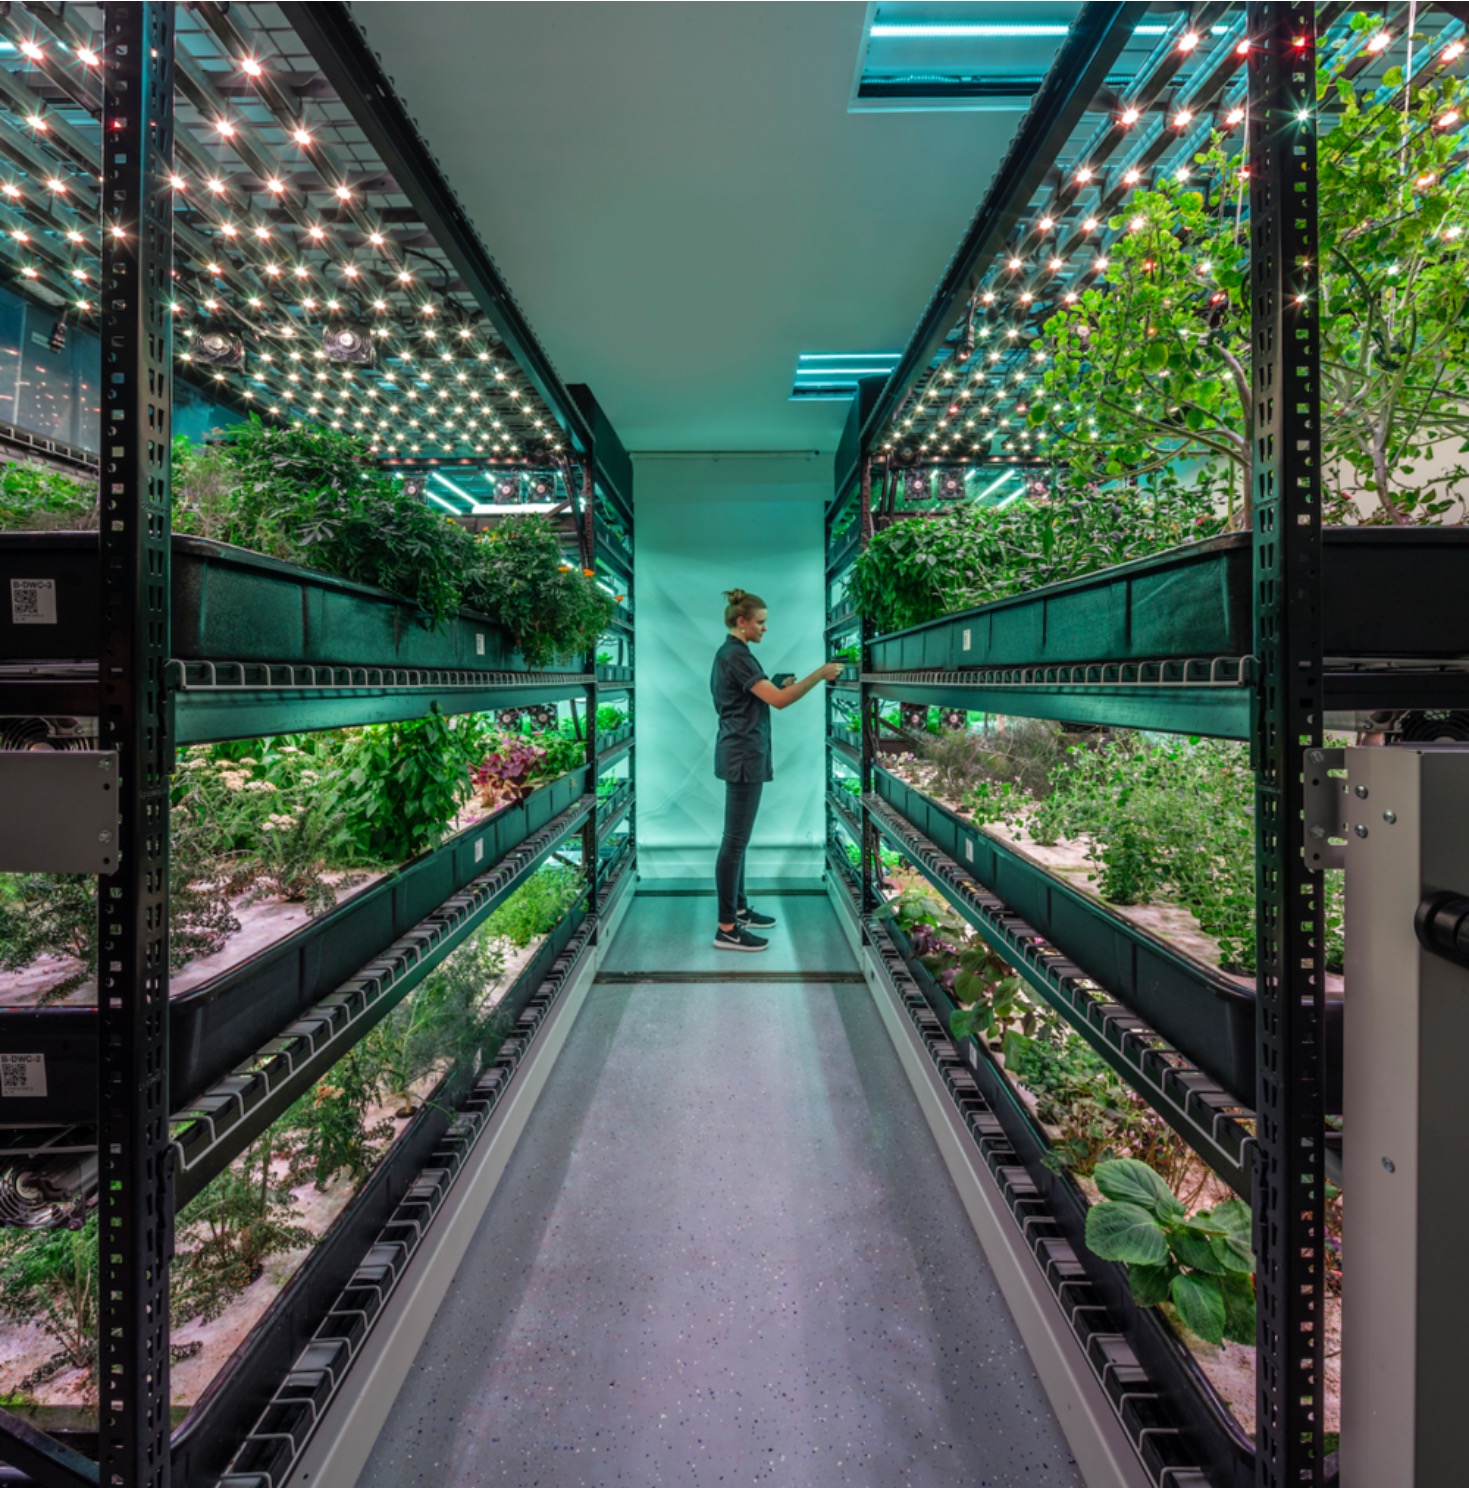 Farm.One is an indoor vertical farm in Manhattan using hydroponic technology to grow rare culinary herbs for New York City’s finest restaurant chefs. Agritecture designed and installed Farm.One’s first facility, recruited their Head Grower, and researched rare crop species for production